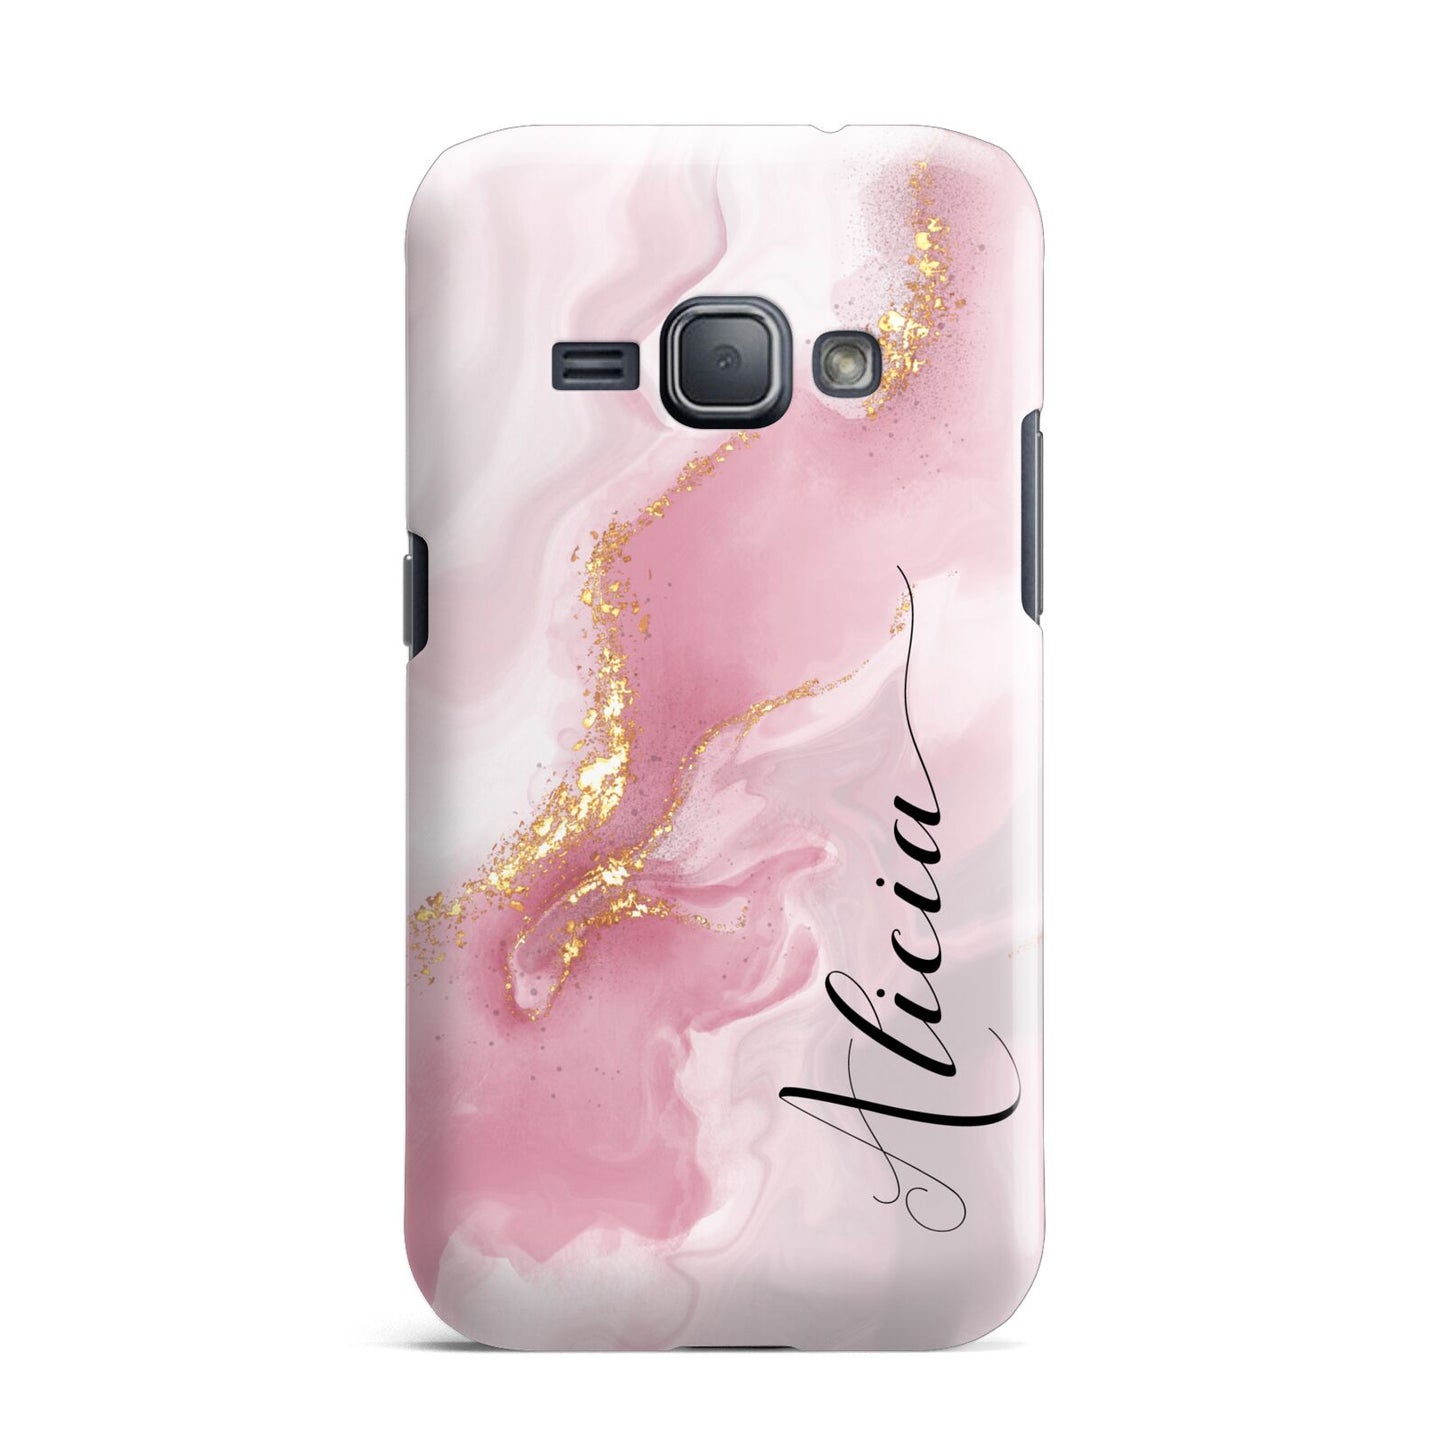 Personalised Pink Marble Samsung Galaxy J1 2016 Case